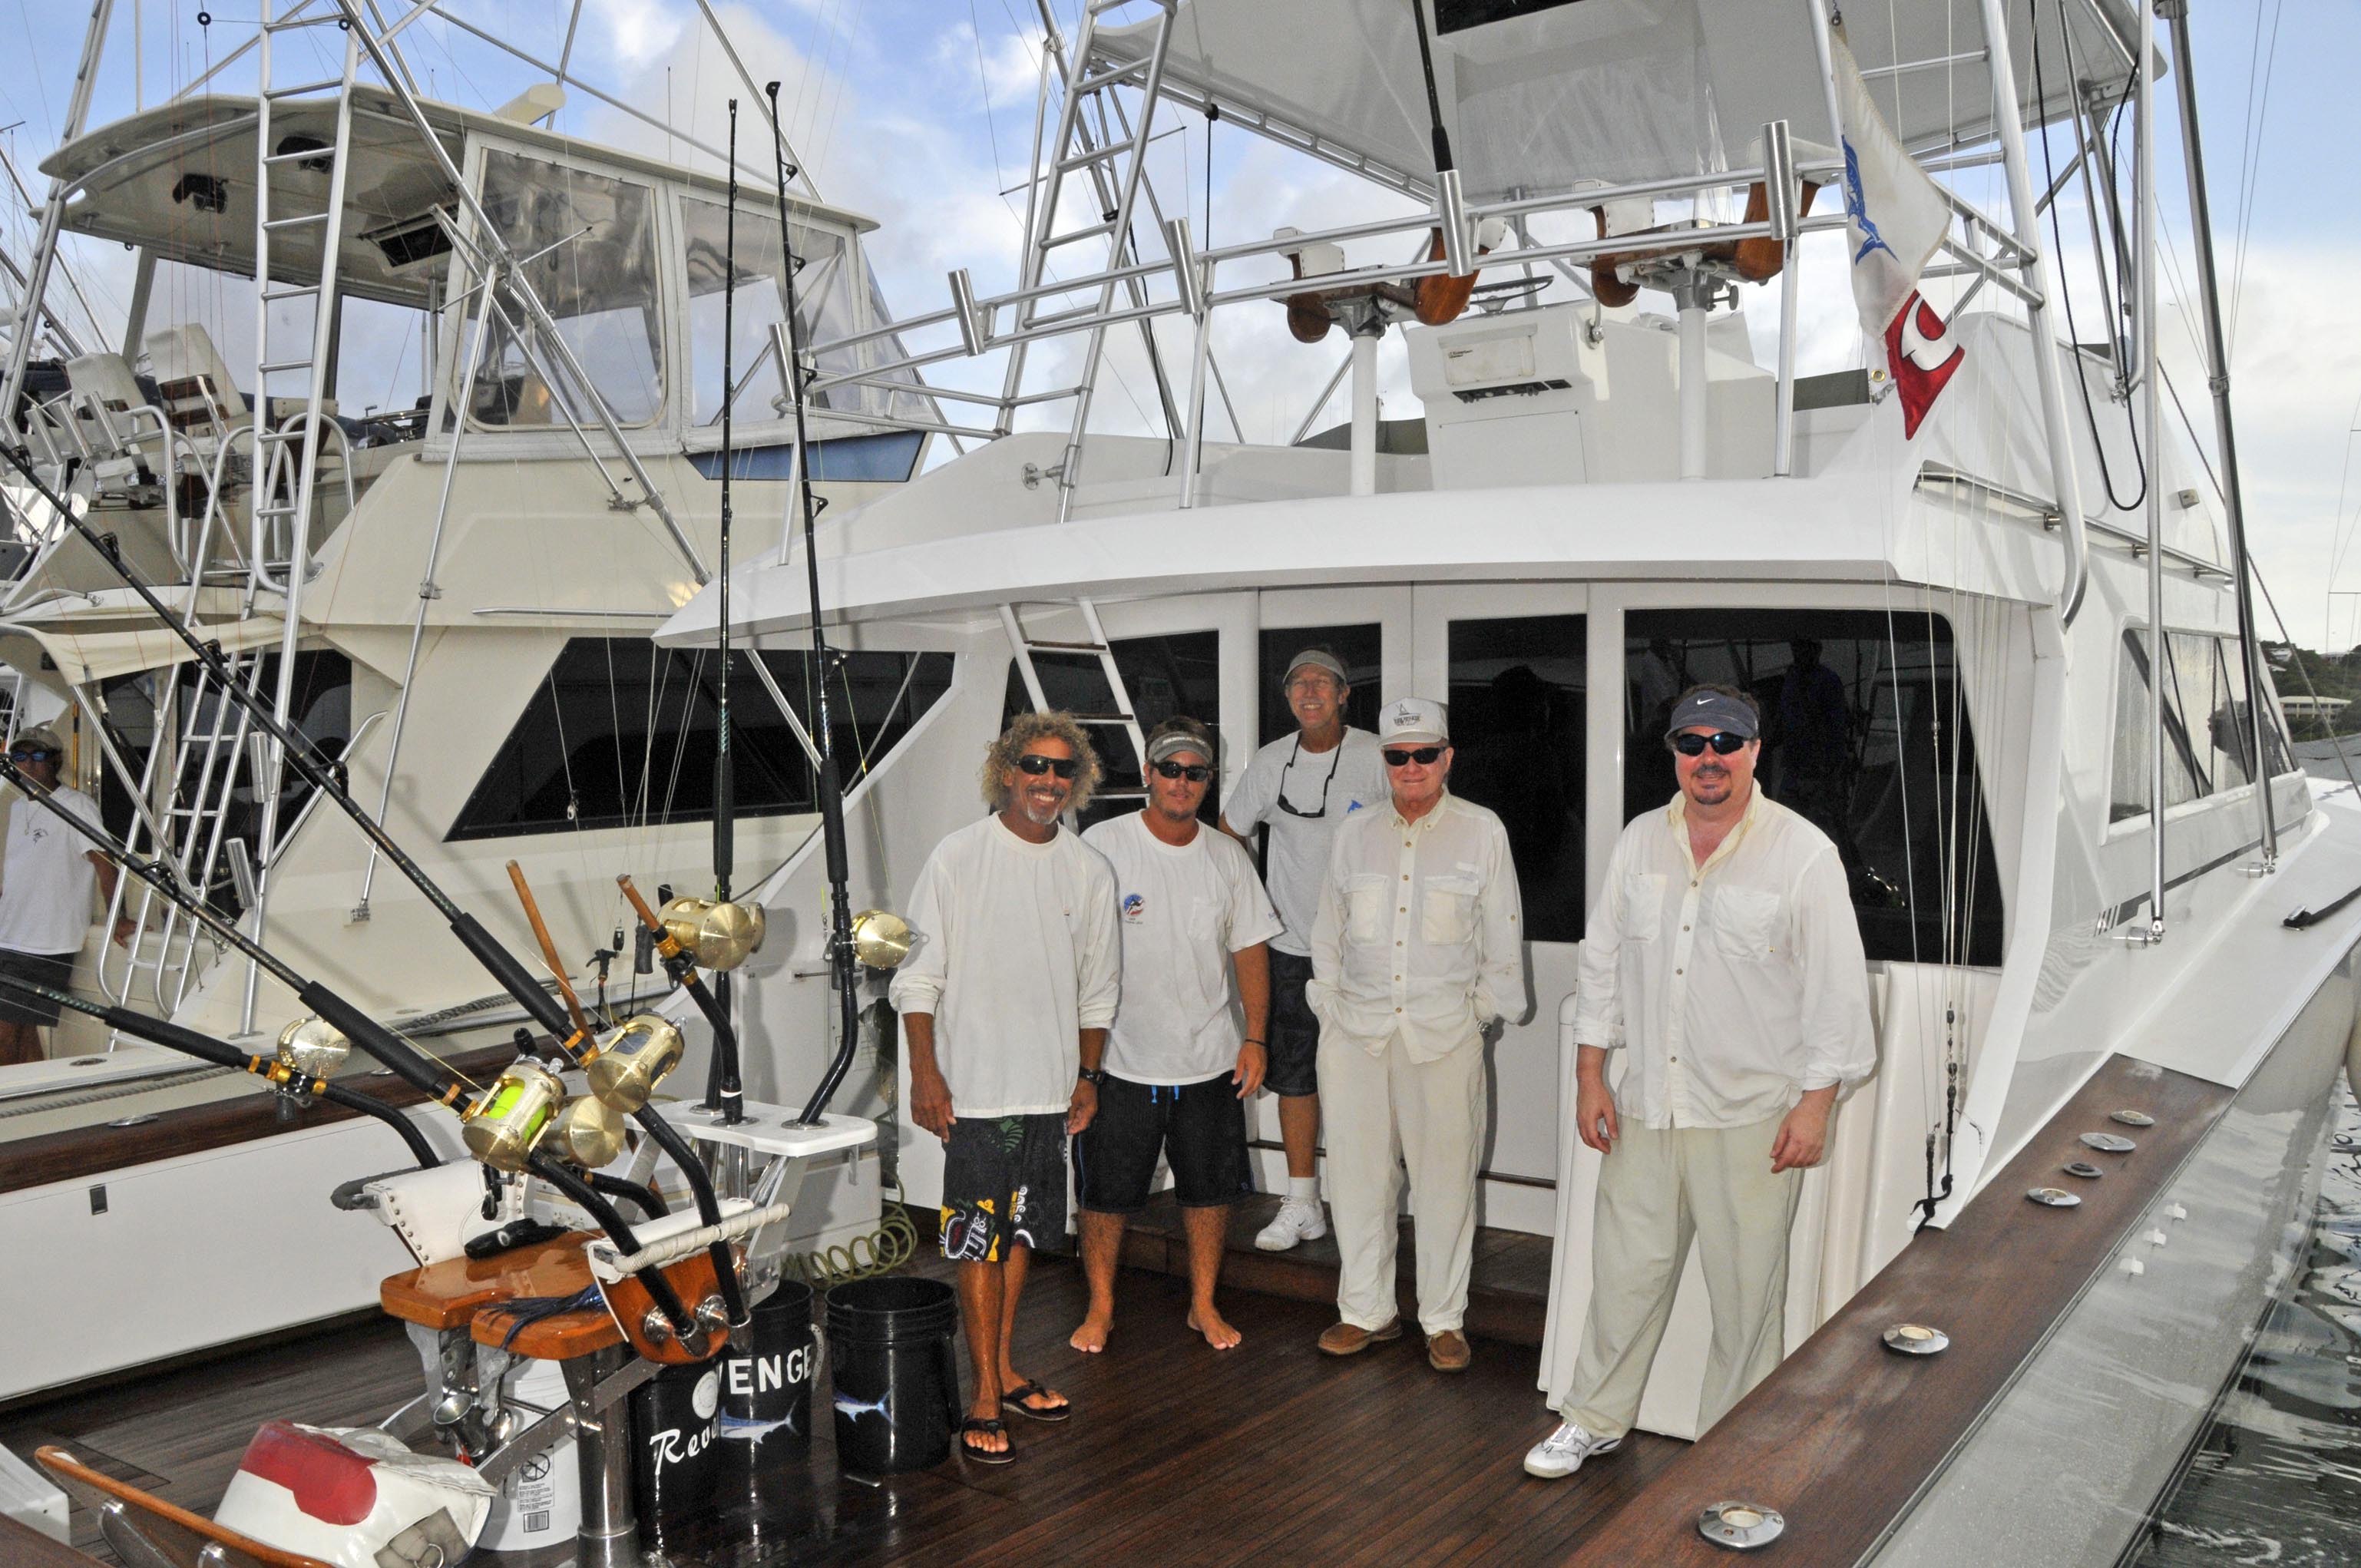 Photo: L to R: Mates Dean Dunham and Ryan Mertens, Capt. Mike Lemon, father-and-son anglers Sam Jennings and Jon Jennings.